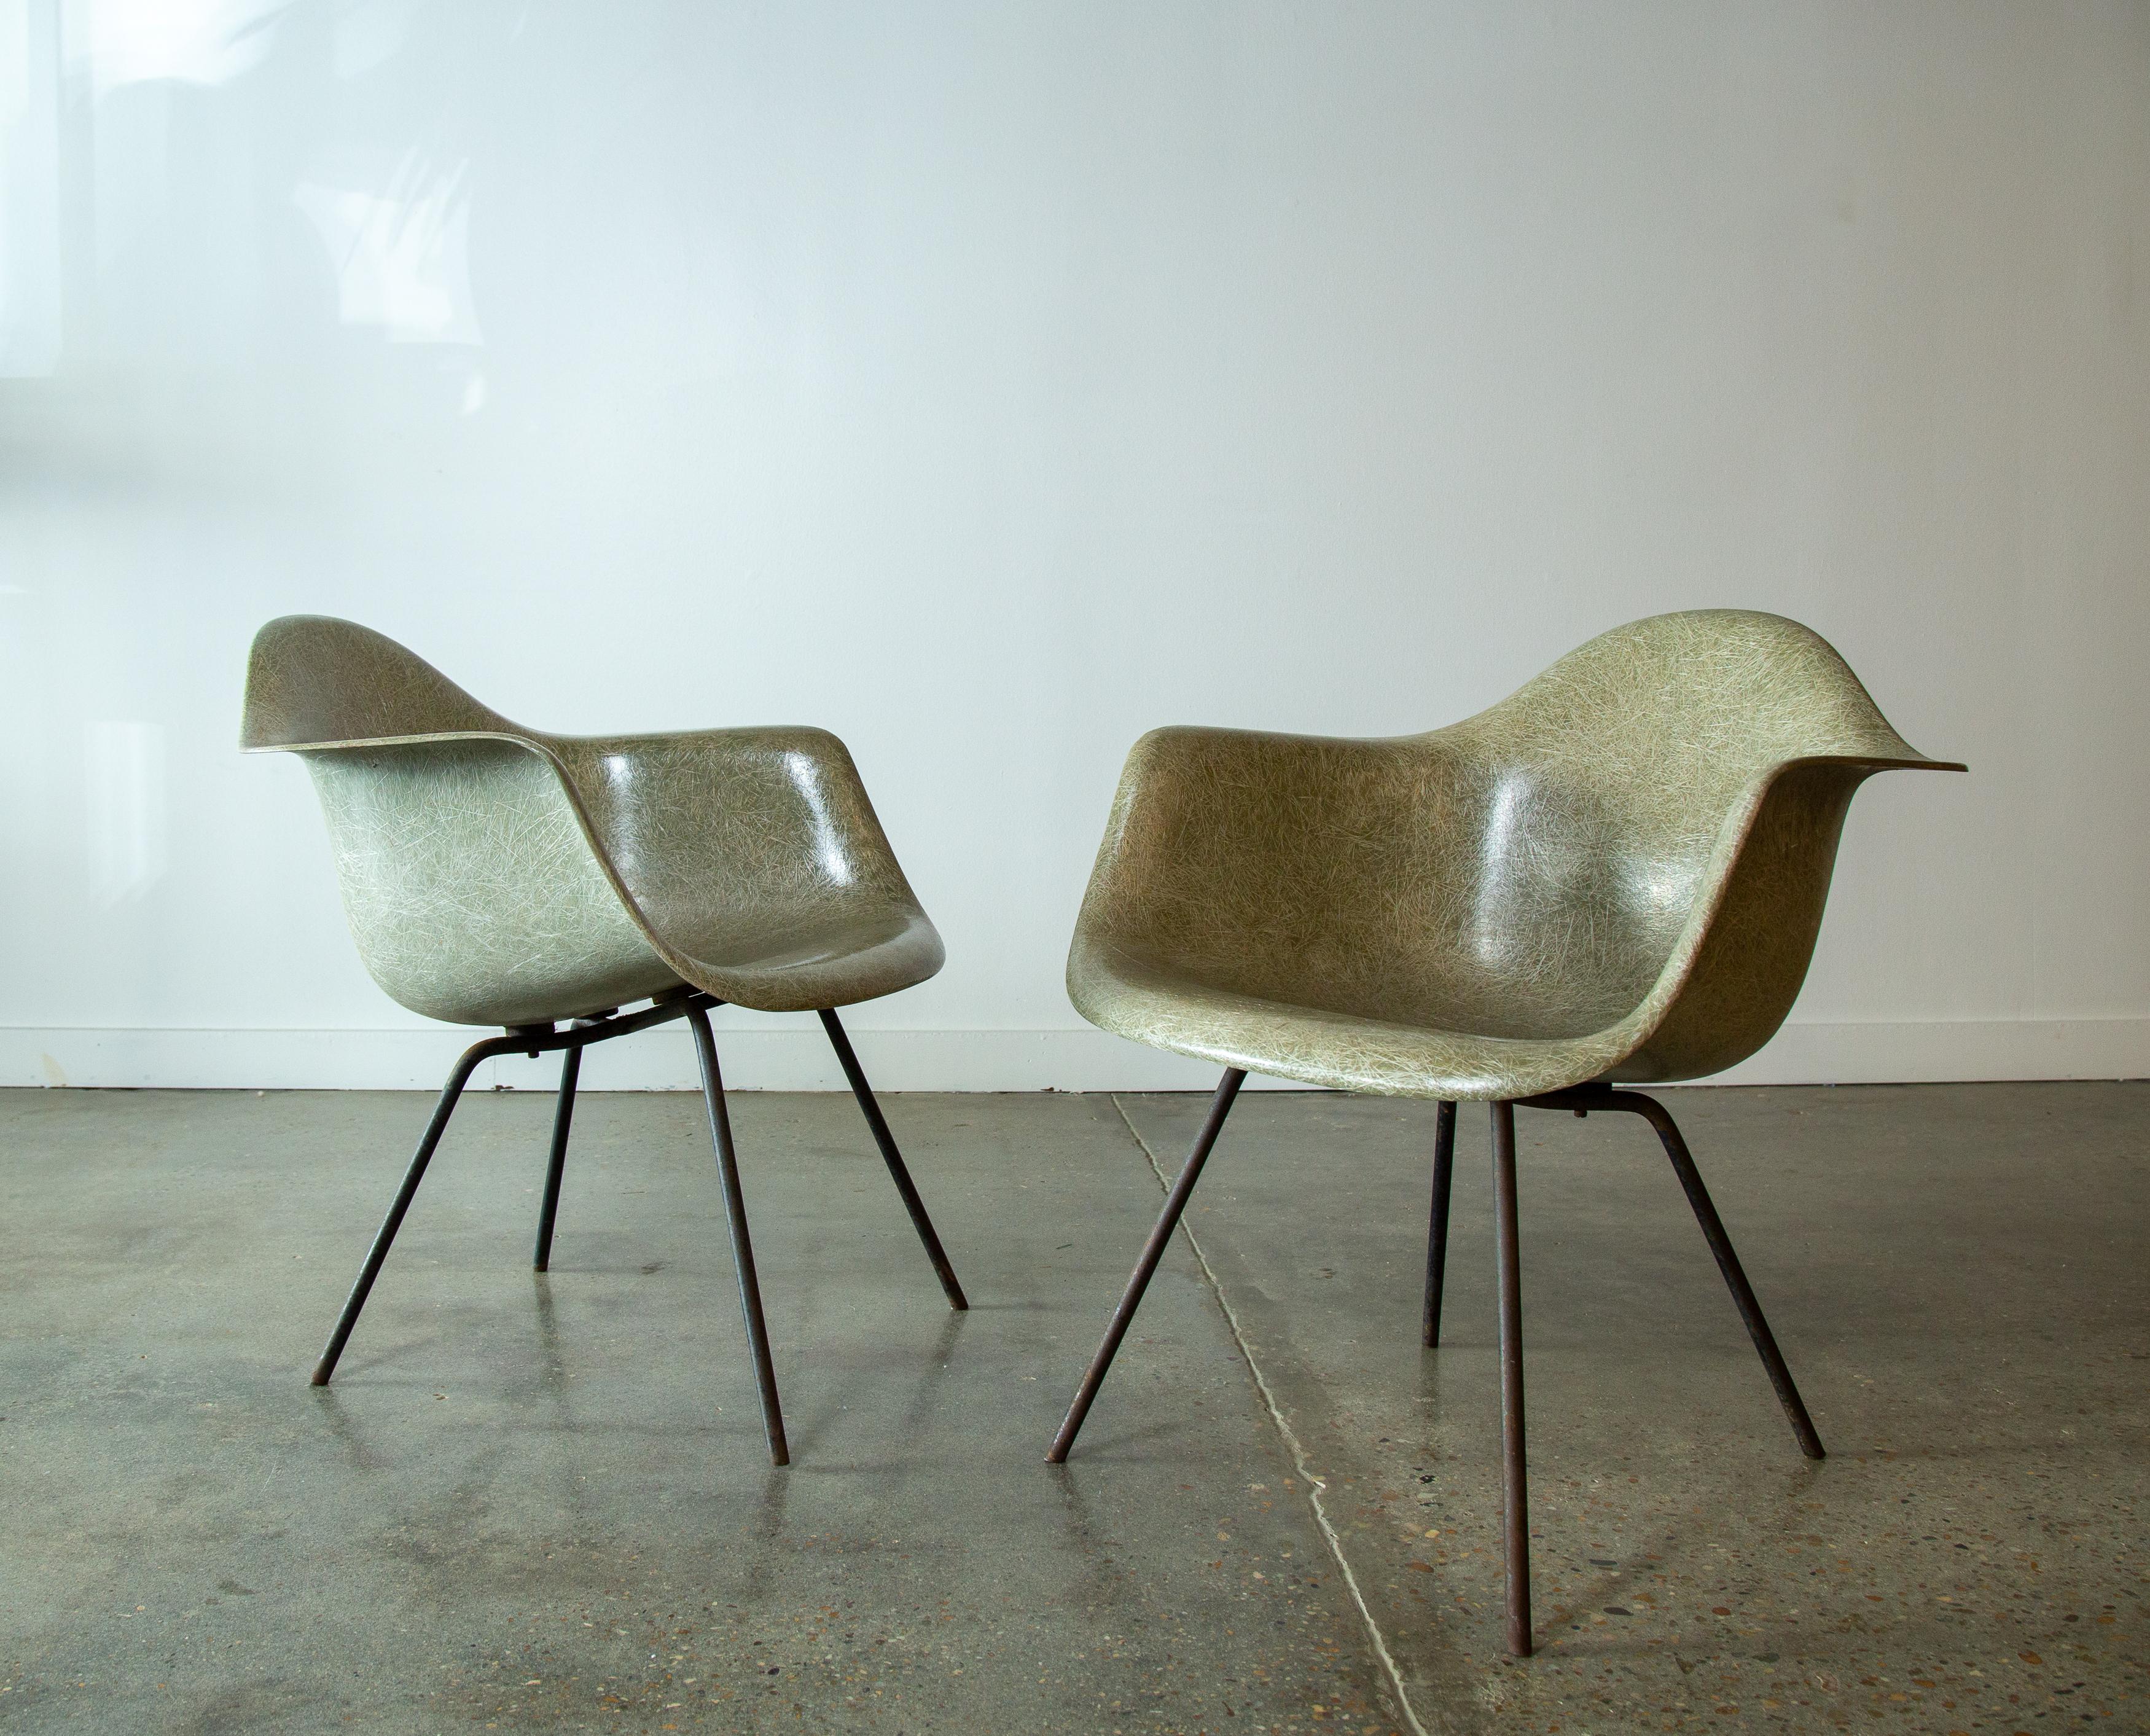 Mid-20th Century 1953 3rd Gen Eames Seafoam Green Shell Armchairs on MAX bases Herman miller